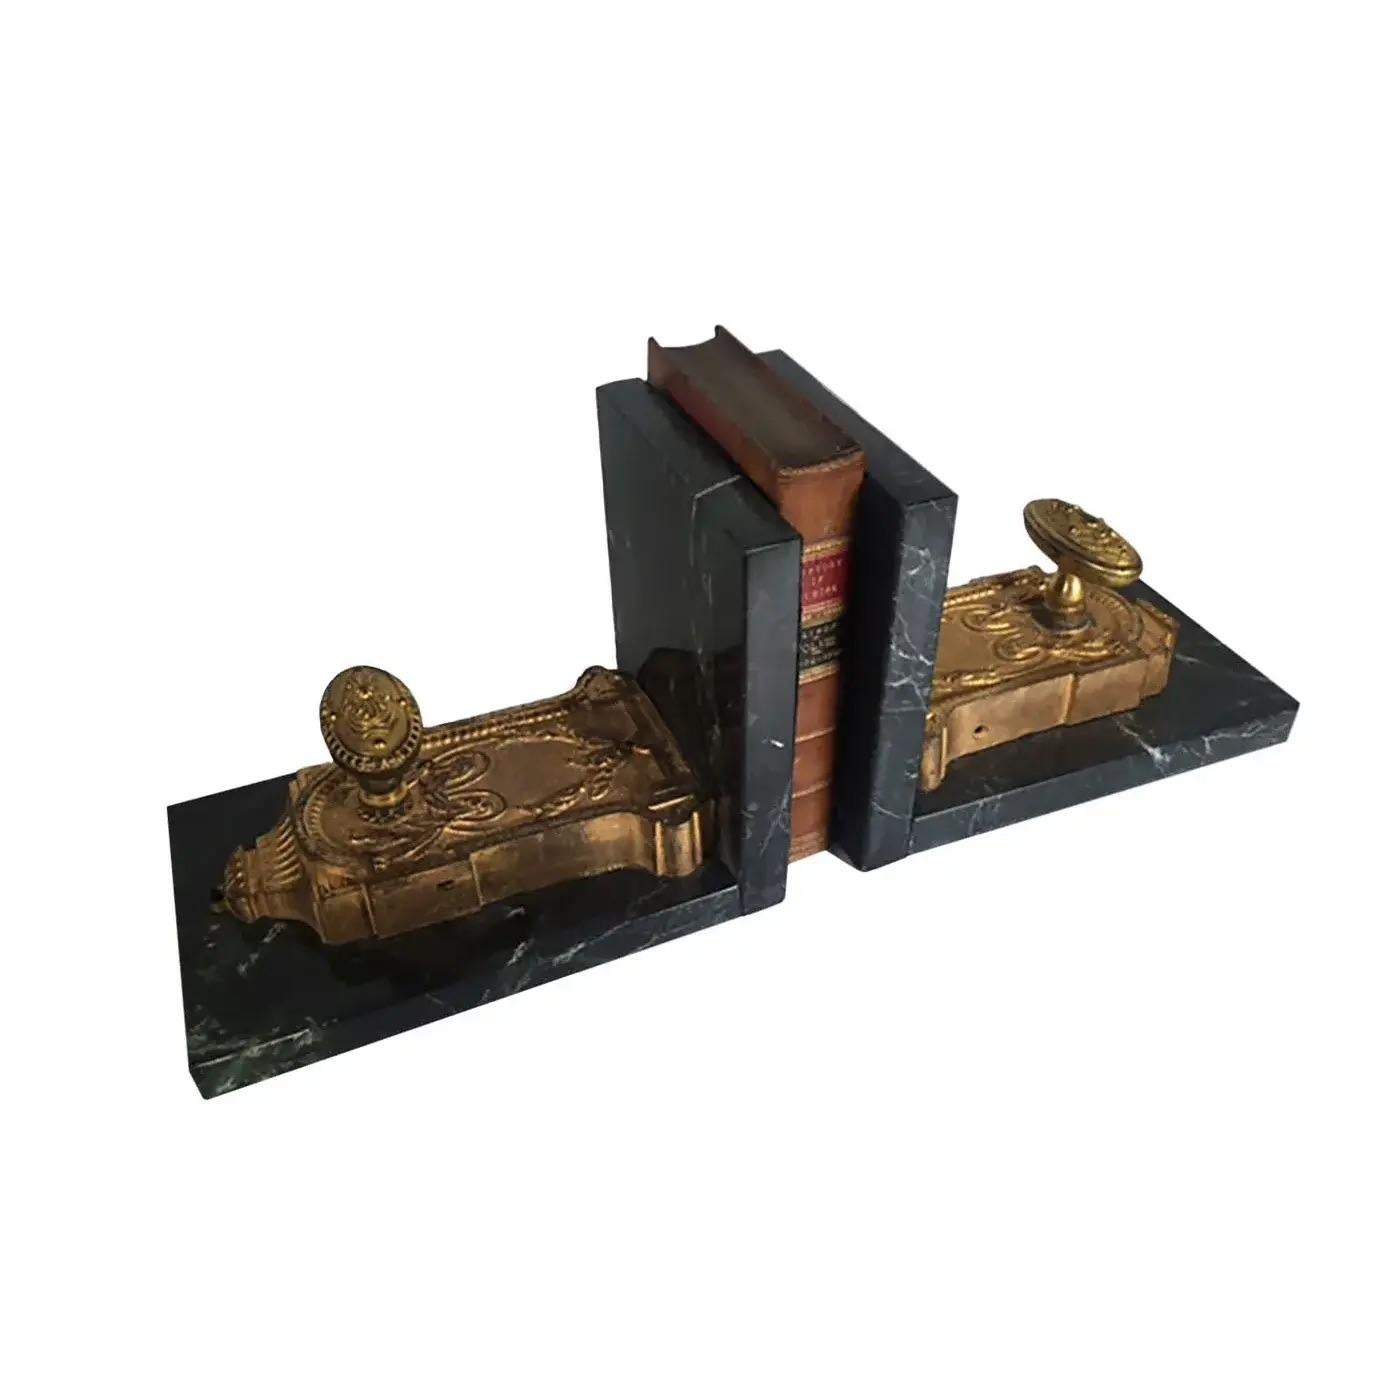 A pair of 1840 French imperial green marble bookends with mounted 18th century Cremona bolts. With handled knobs. High quality bronze doré. Circa 1840.